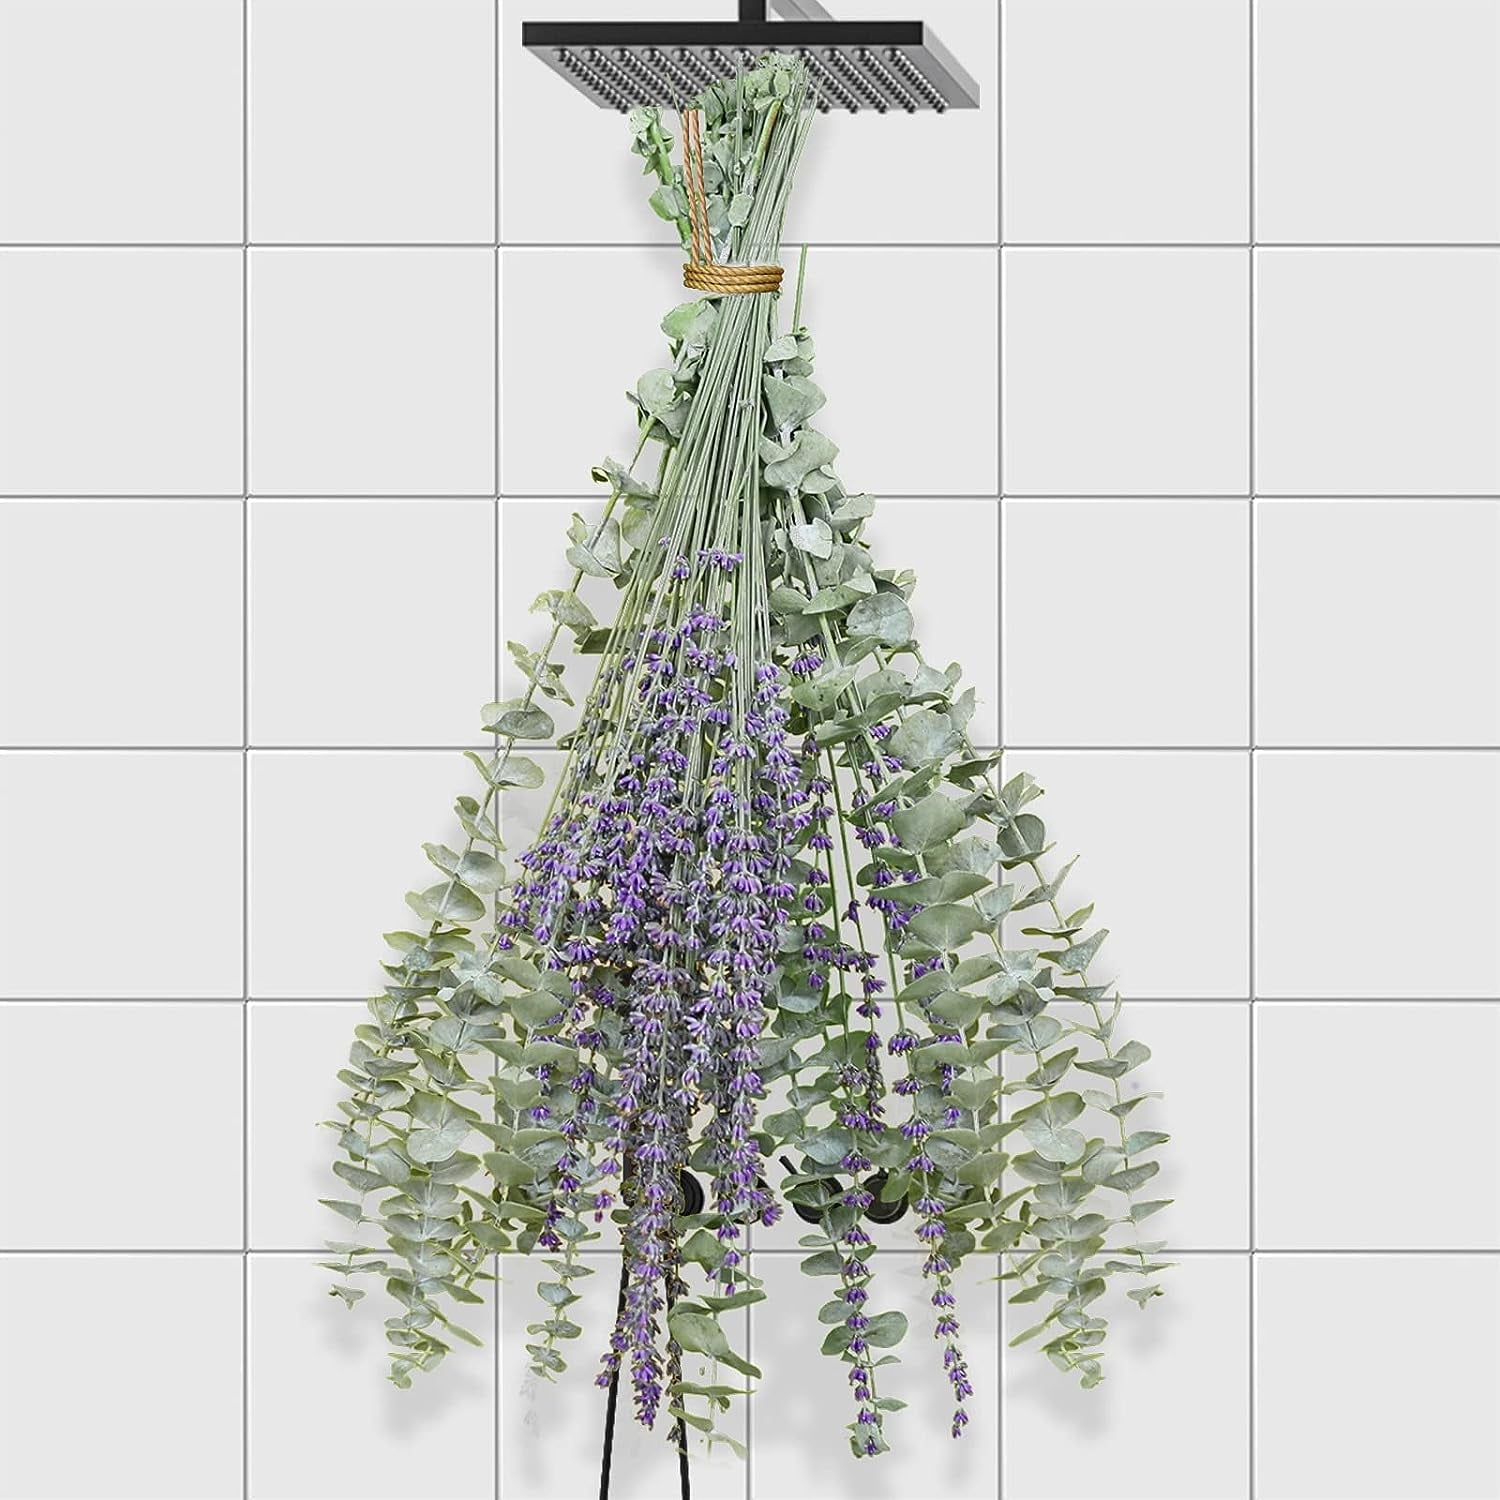 Live Aromatic and Edible Herb – Lavender – Naturally Improves Sleep –  Wrapped in Deco Cover – 14″ Tall by 6″ Wide in 1.25 Quart Pot